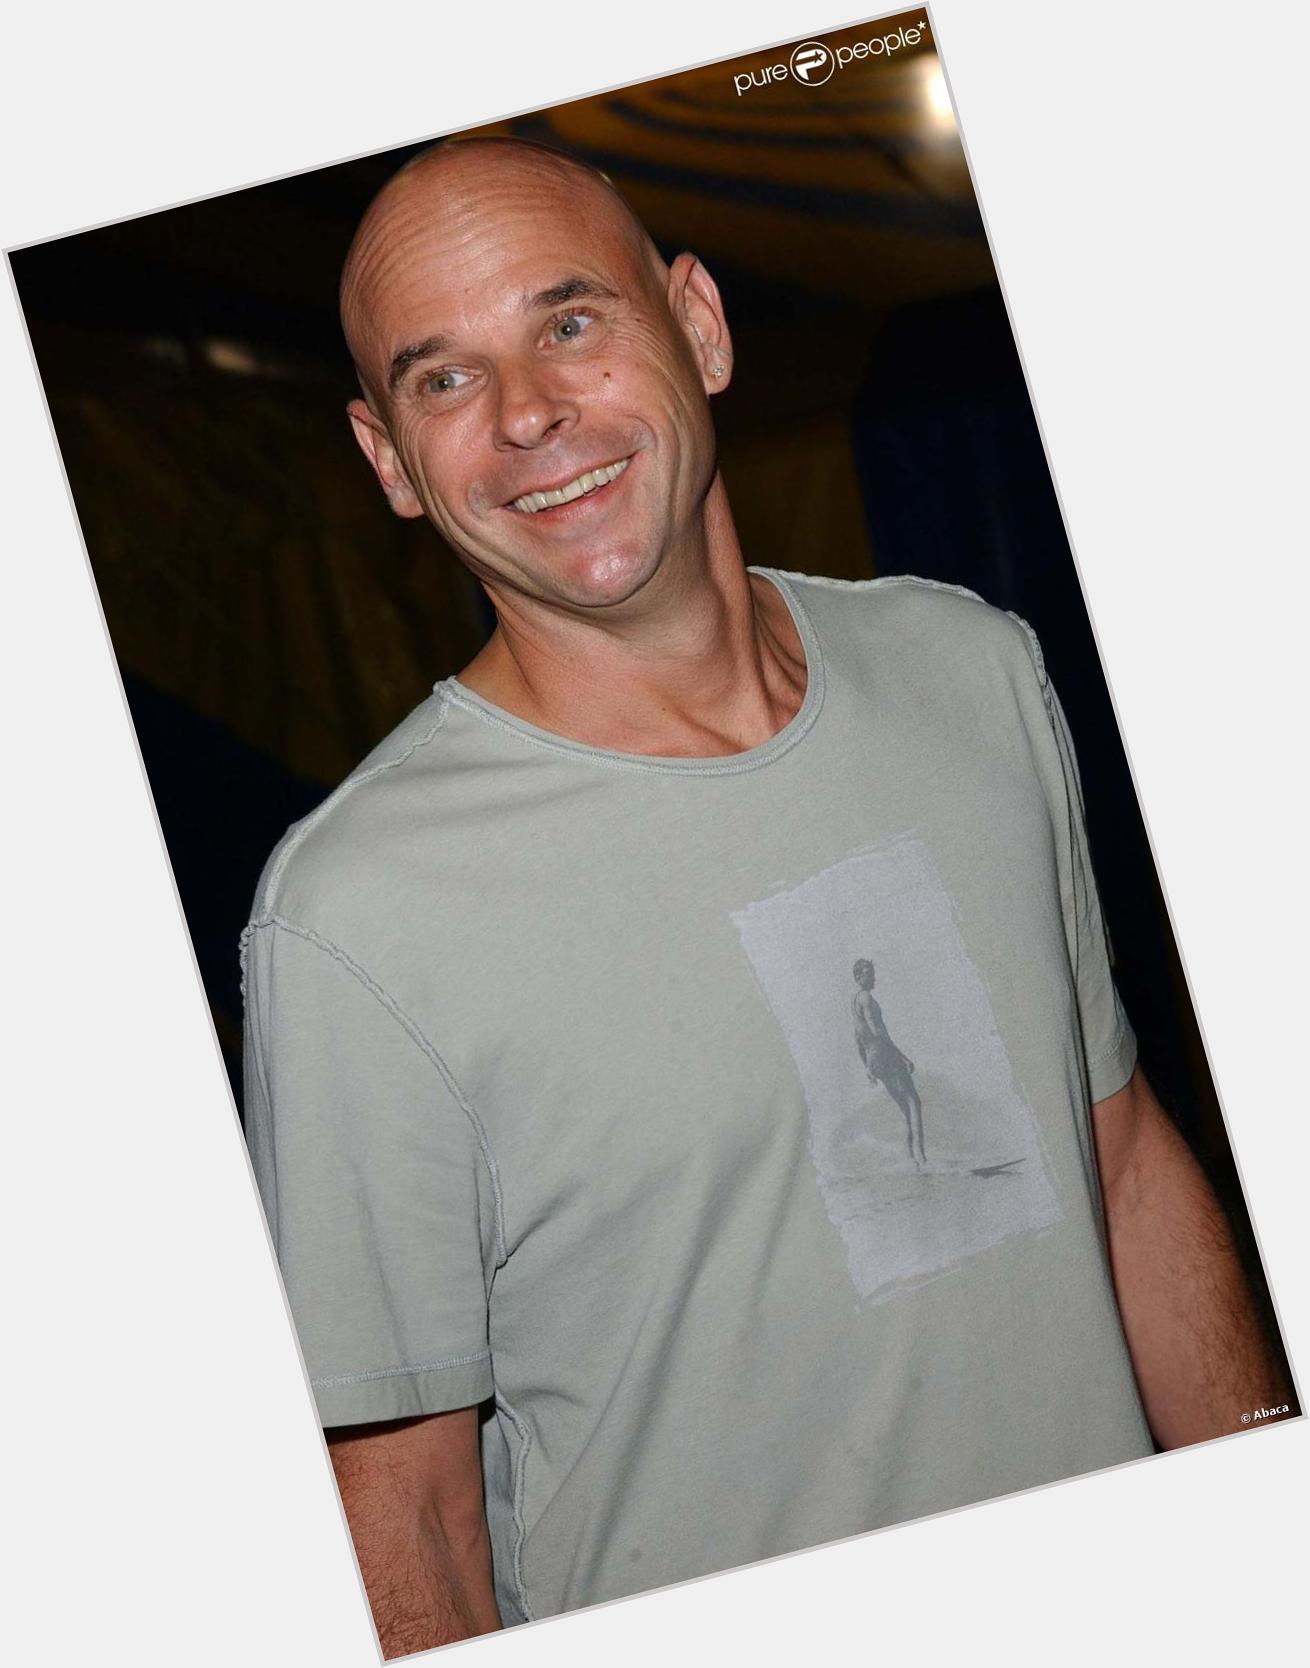 <a href="/hot-men/guy-laliberte/is-he-married-eric-what-net-worth-connected">Guy Laliberte</a>  bald hair & hairstyles